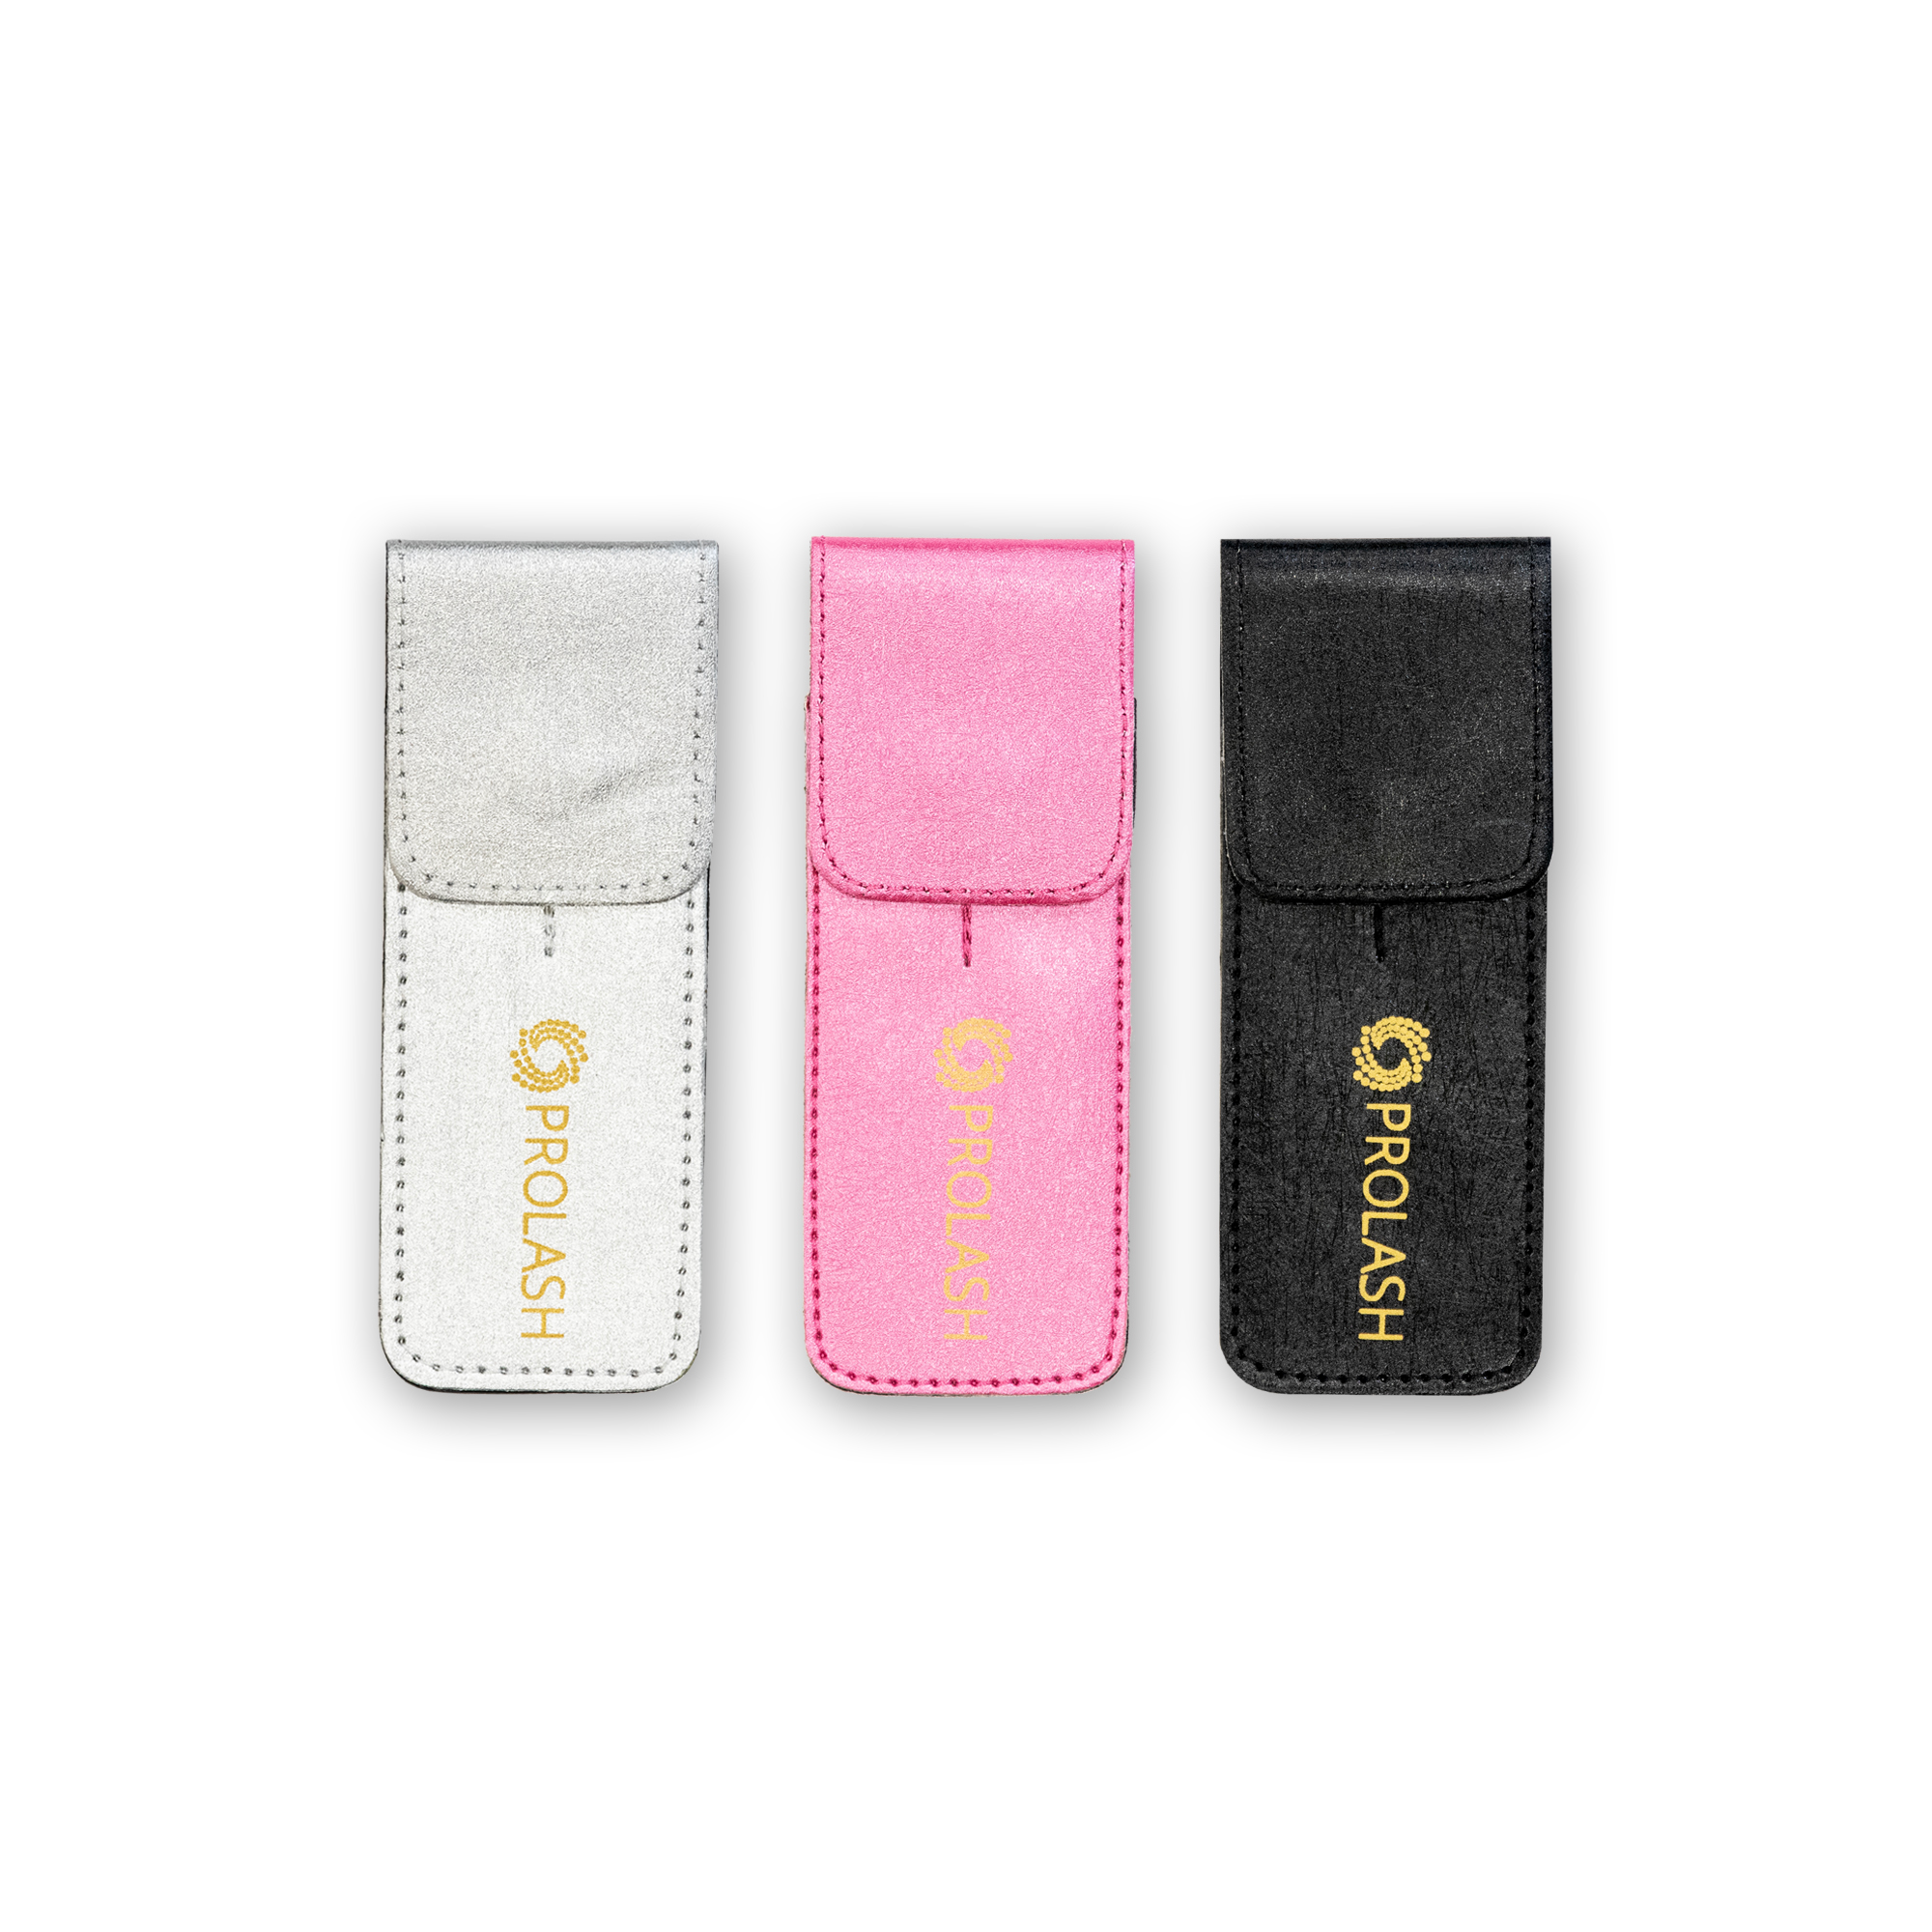 Ecig Pouch 